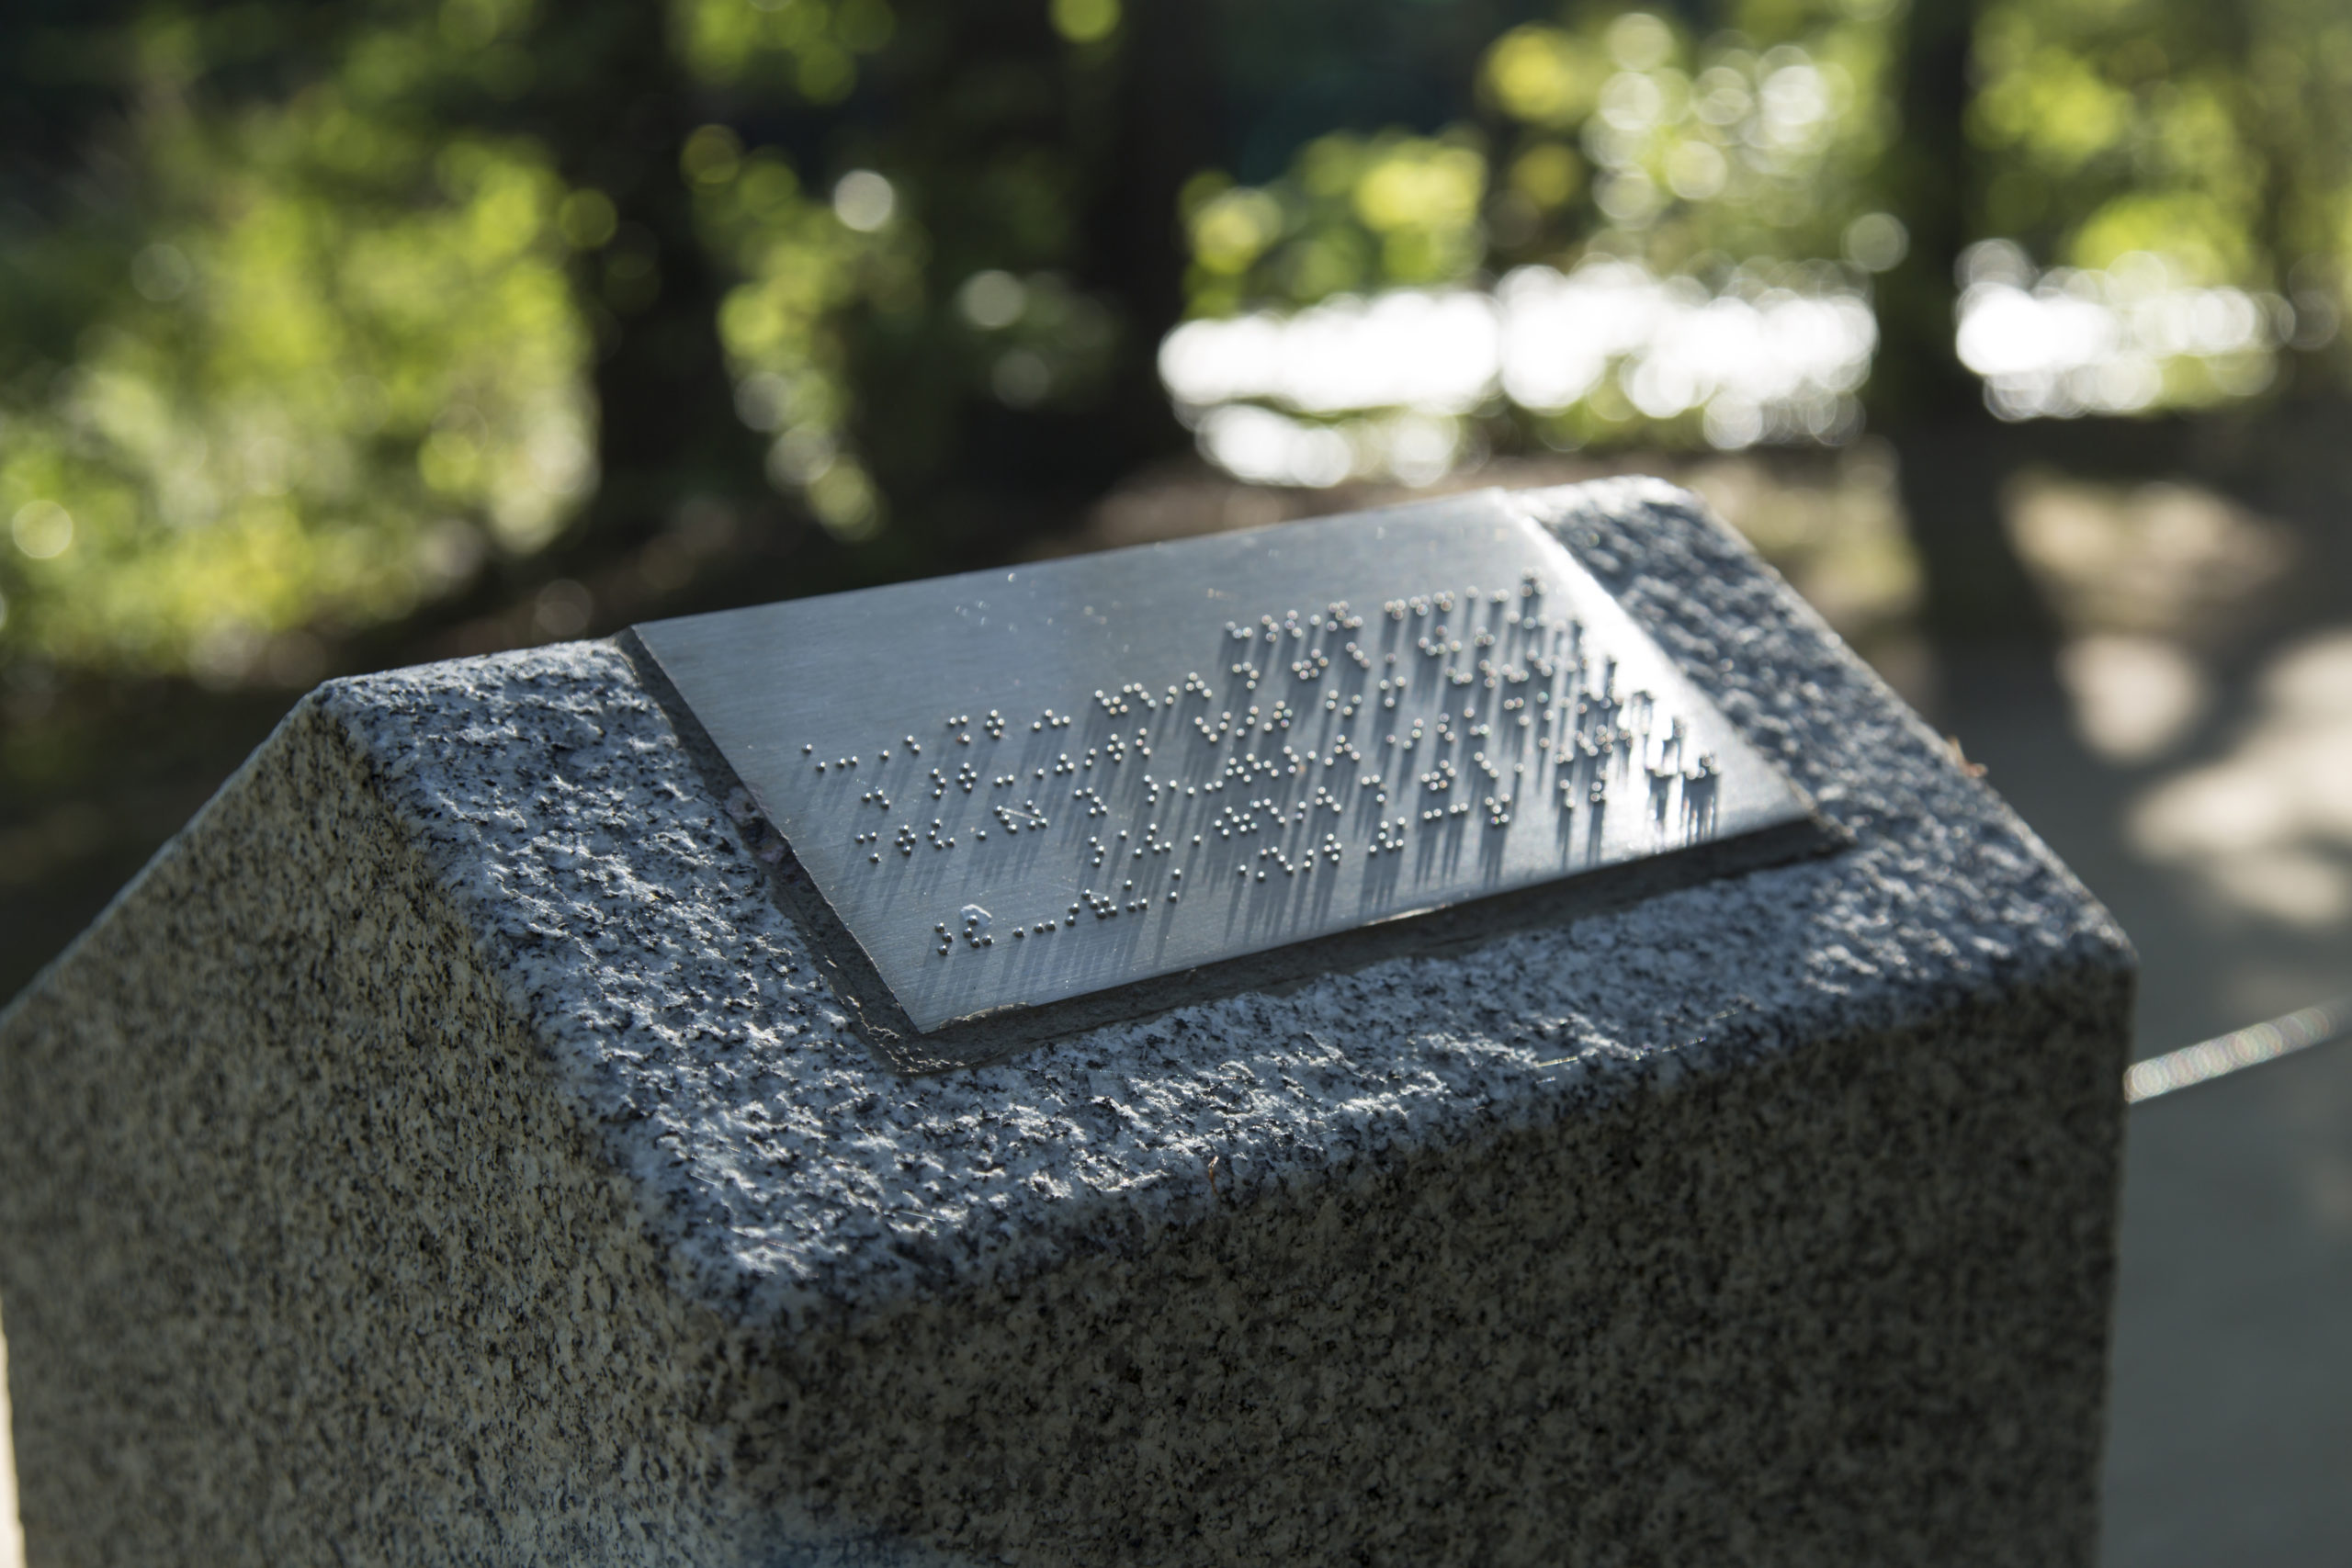 close-up of the park placard, written in braille